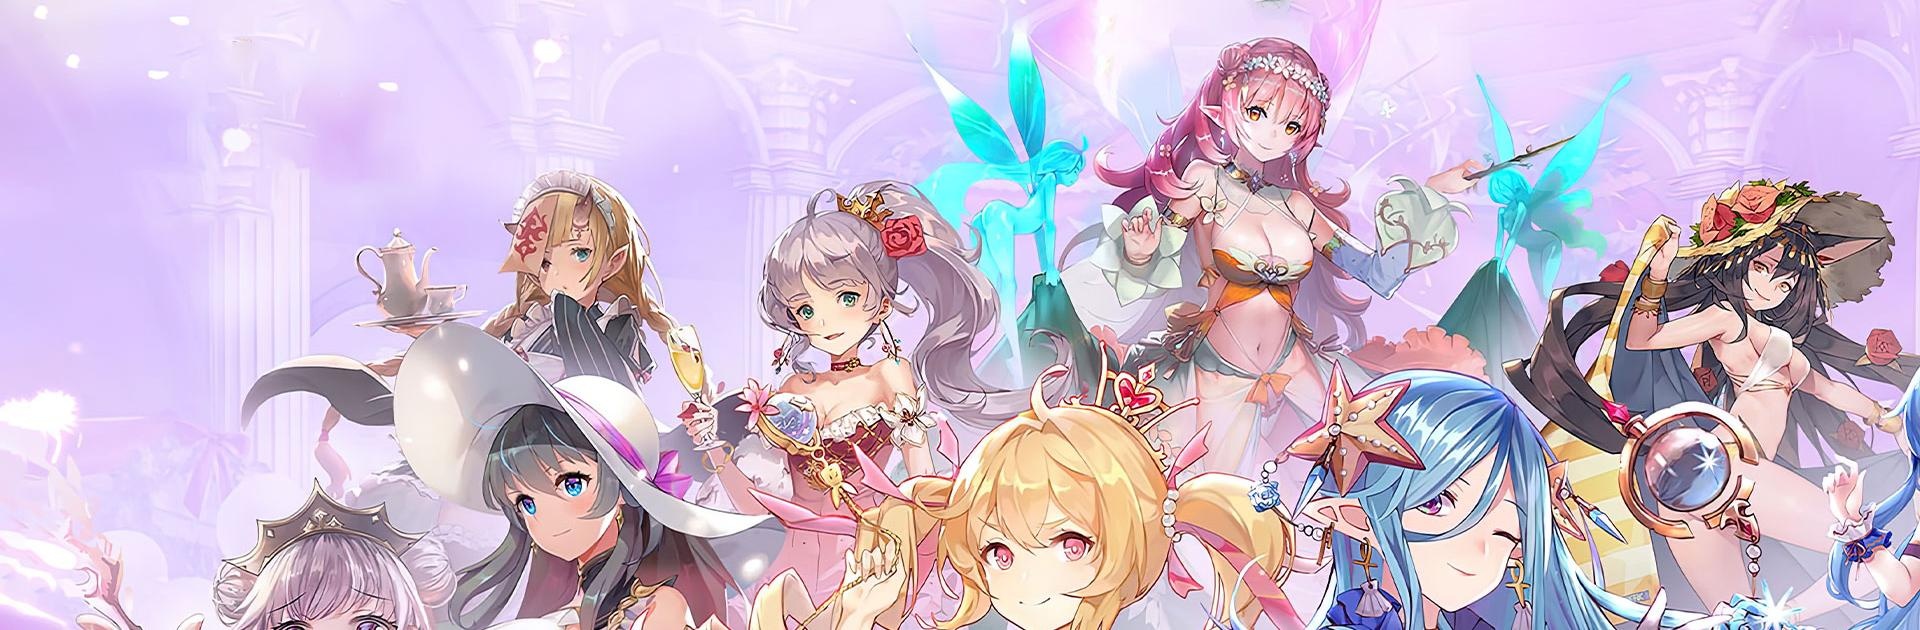 Girls’ Connect: Idle RPG